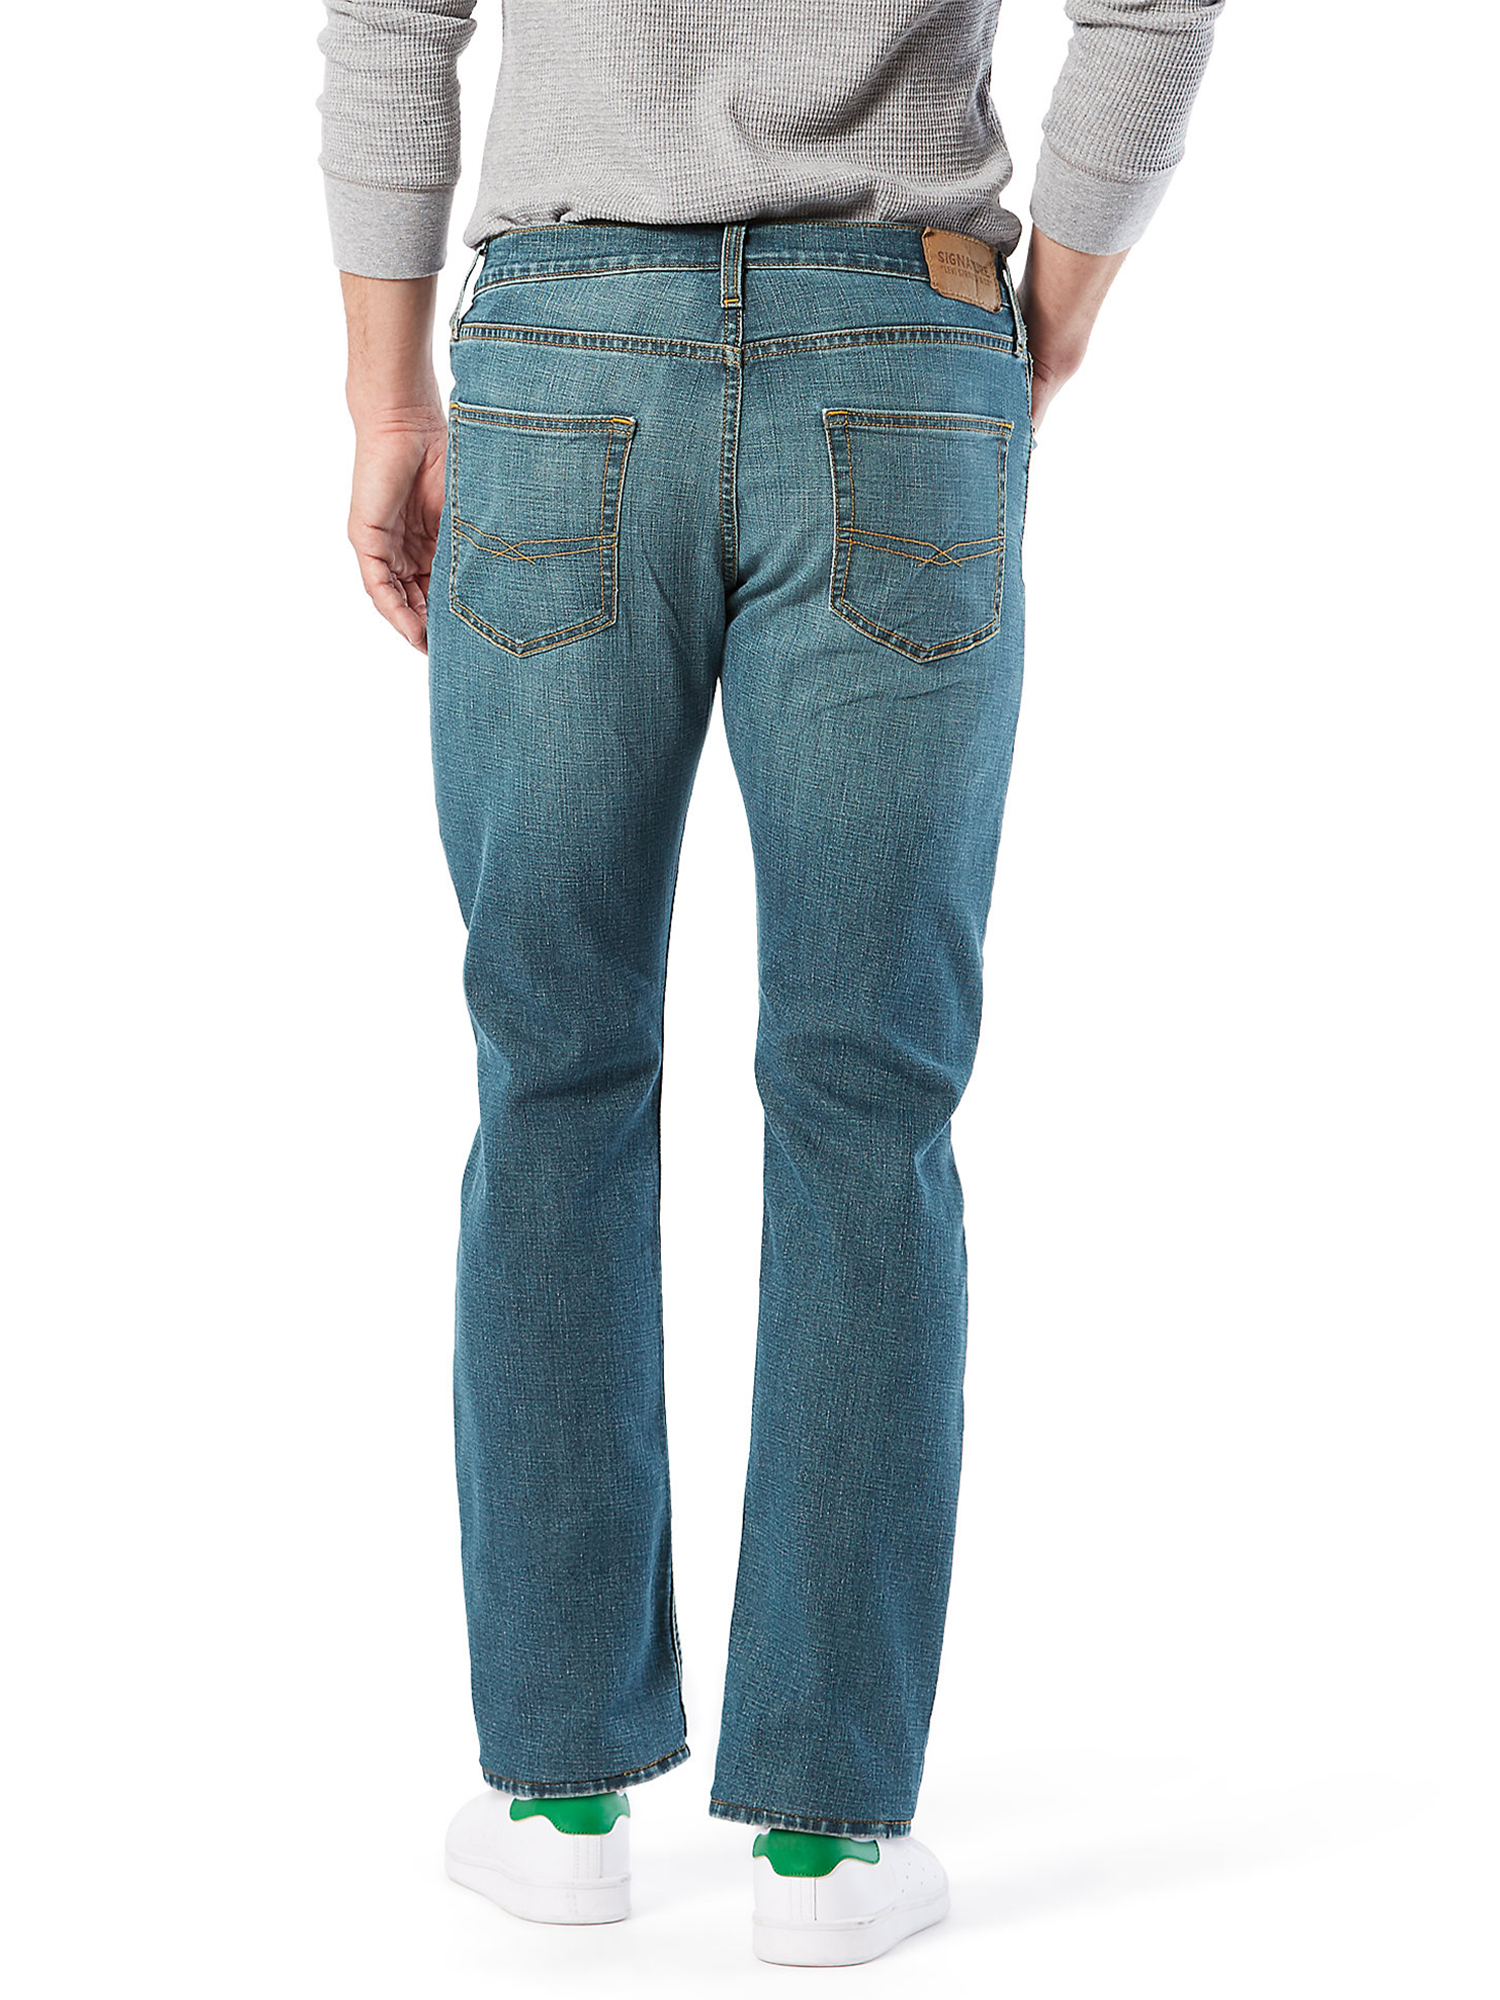 Signature by Levi Strauss & Co. Men's and Big and Tall Straight Fit Jeans - image 4 of 6